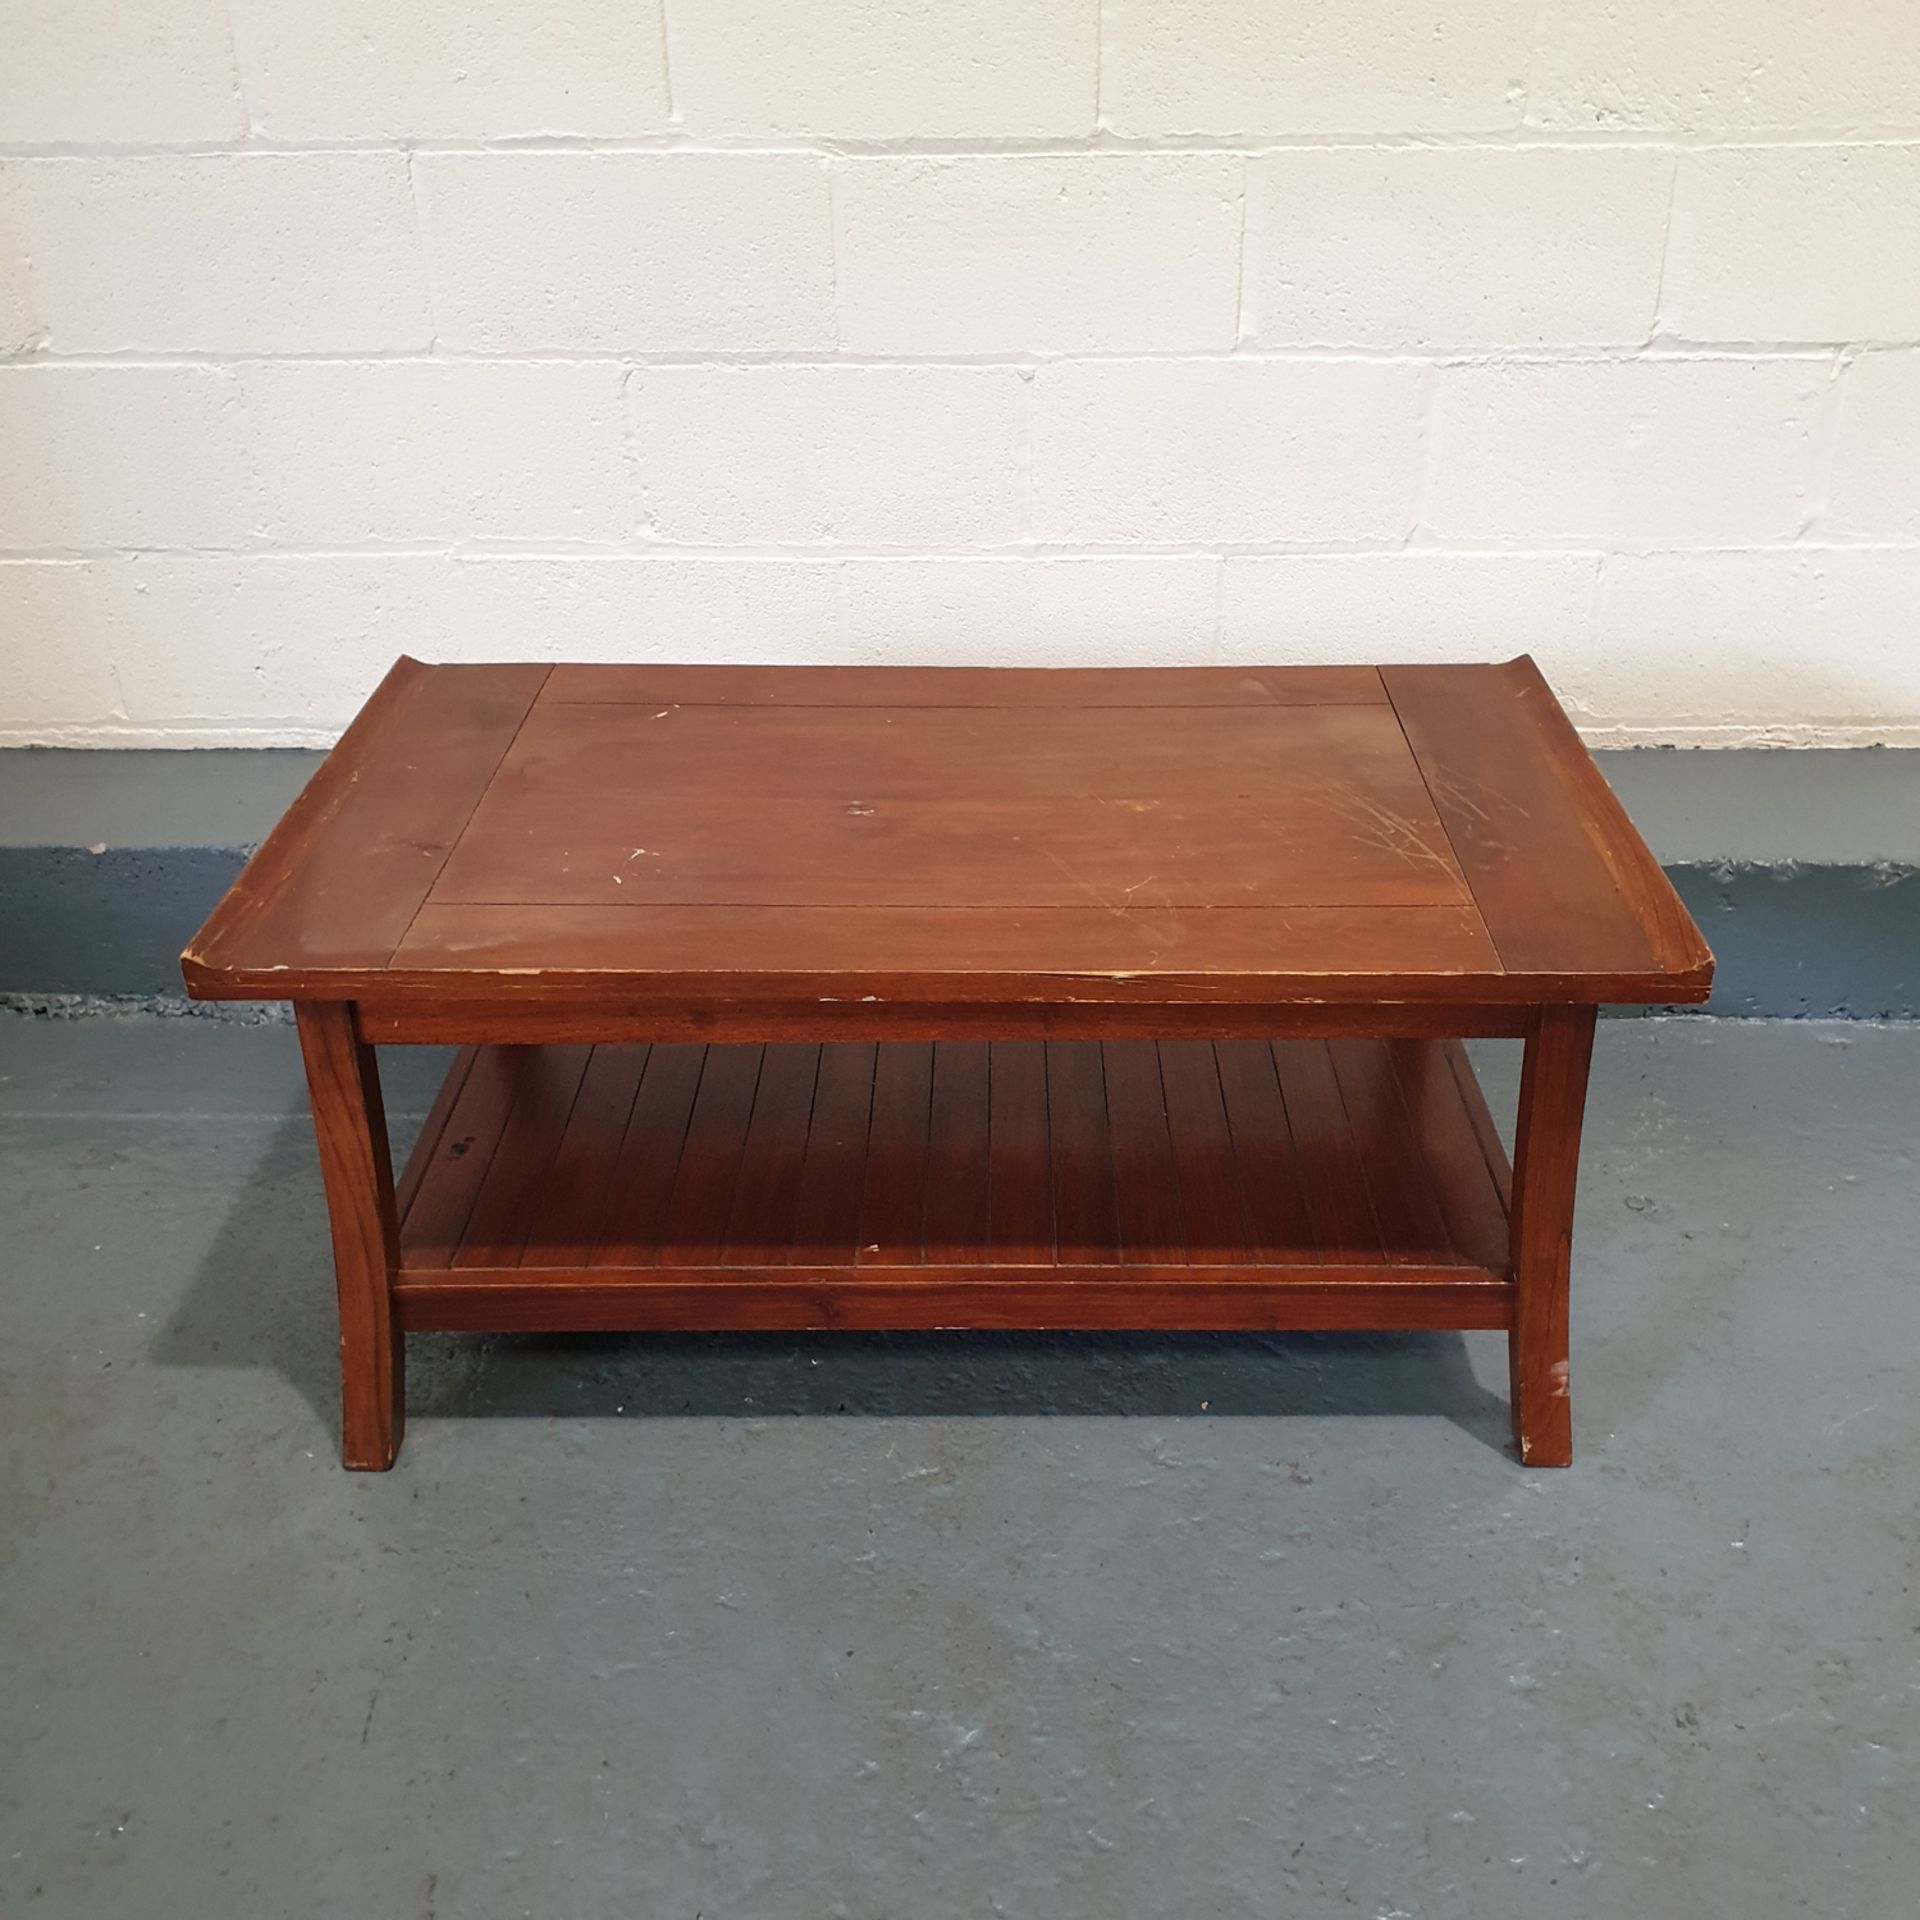 Coffee Table. Approx Dimensions 1100mm x 600mm x 490mm High.